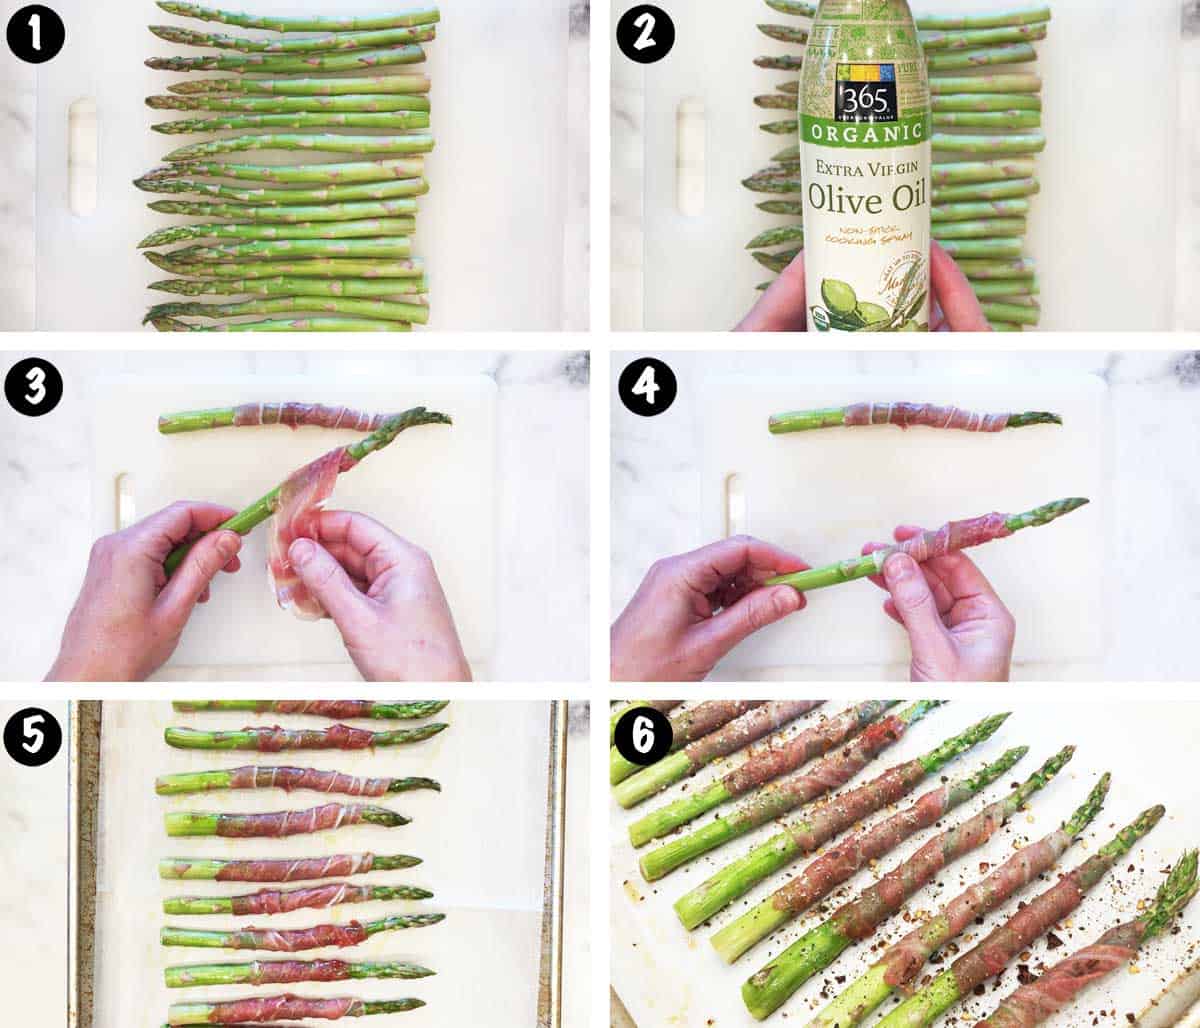 A photo collage showing the steps for making prosciutto-wrapped asparagus.